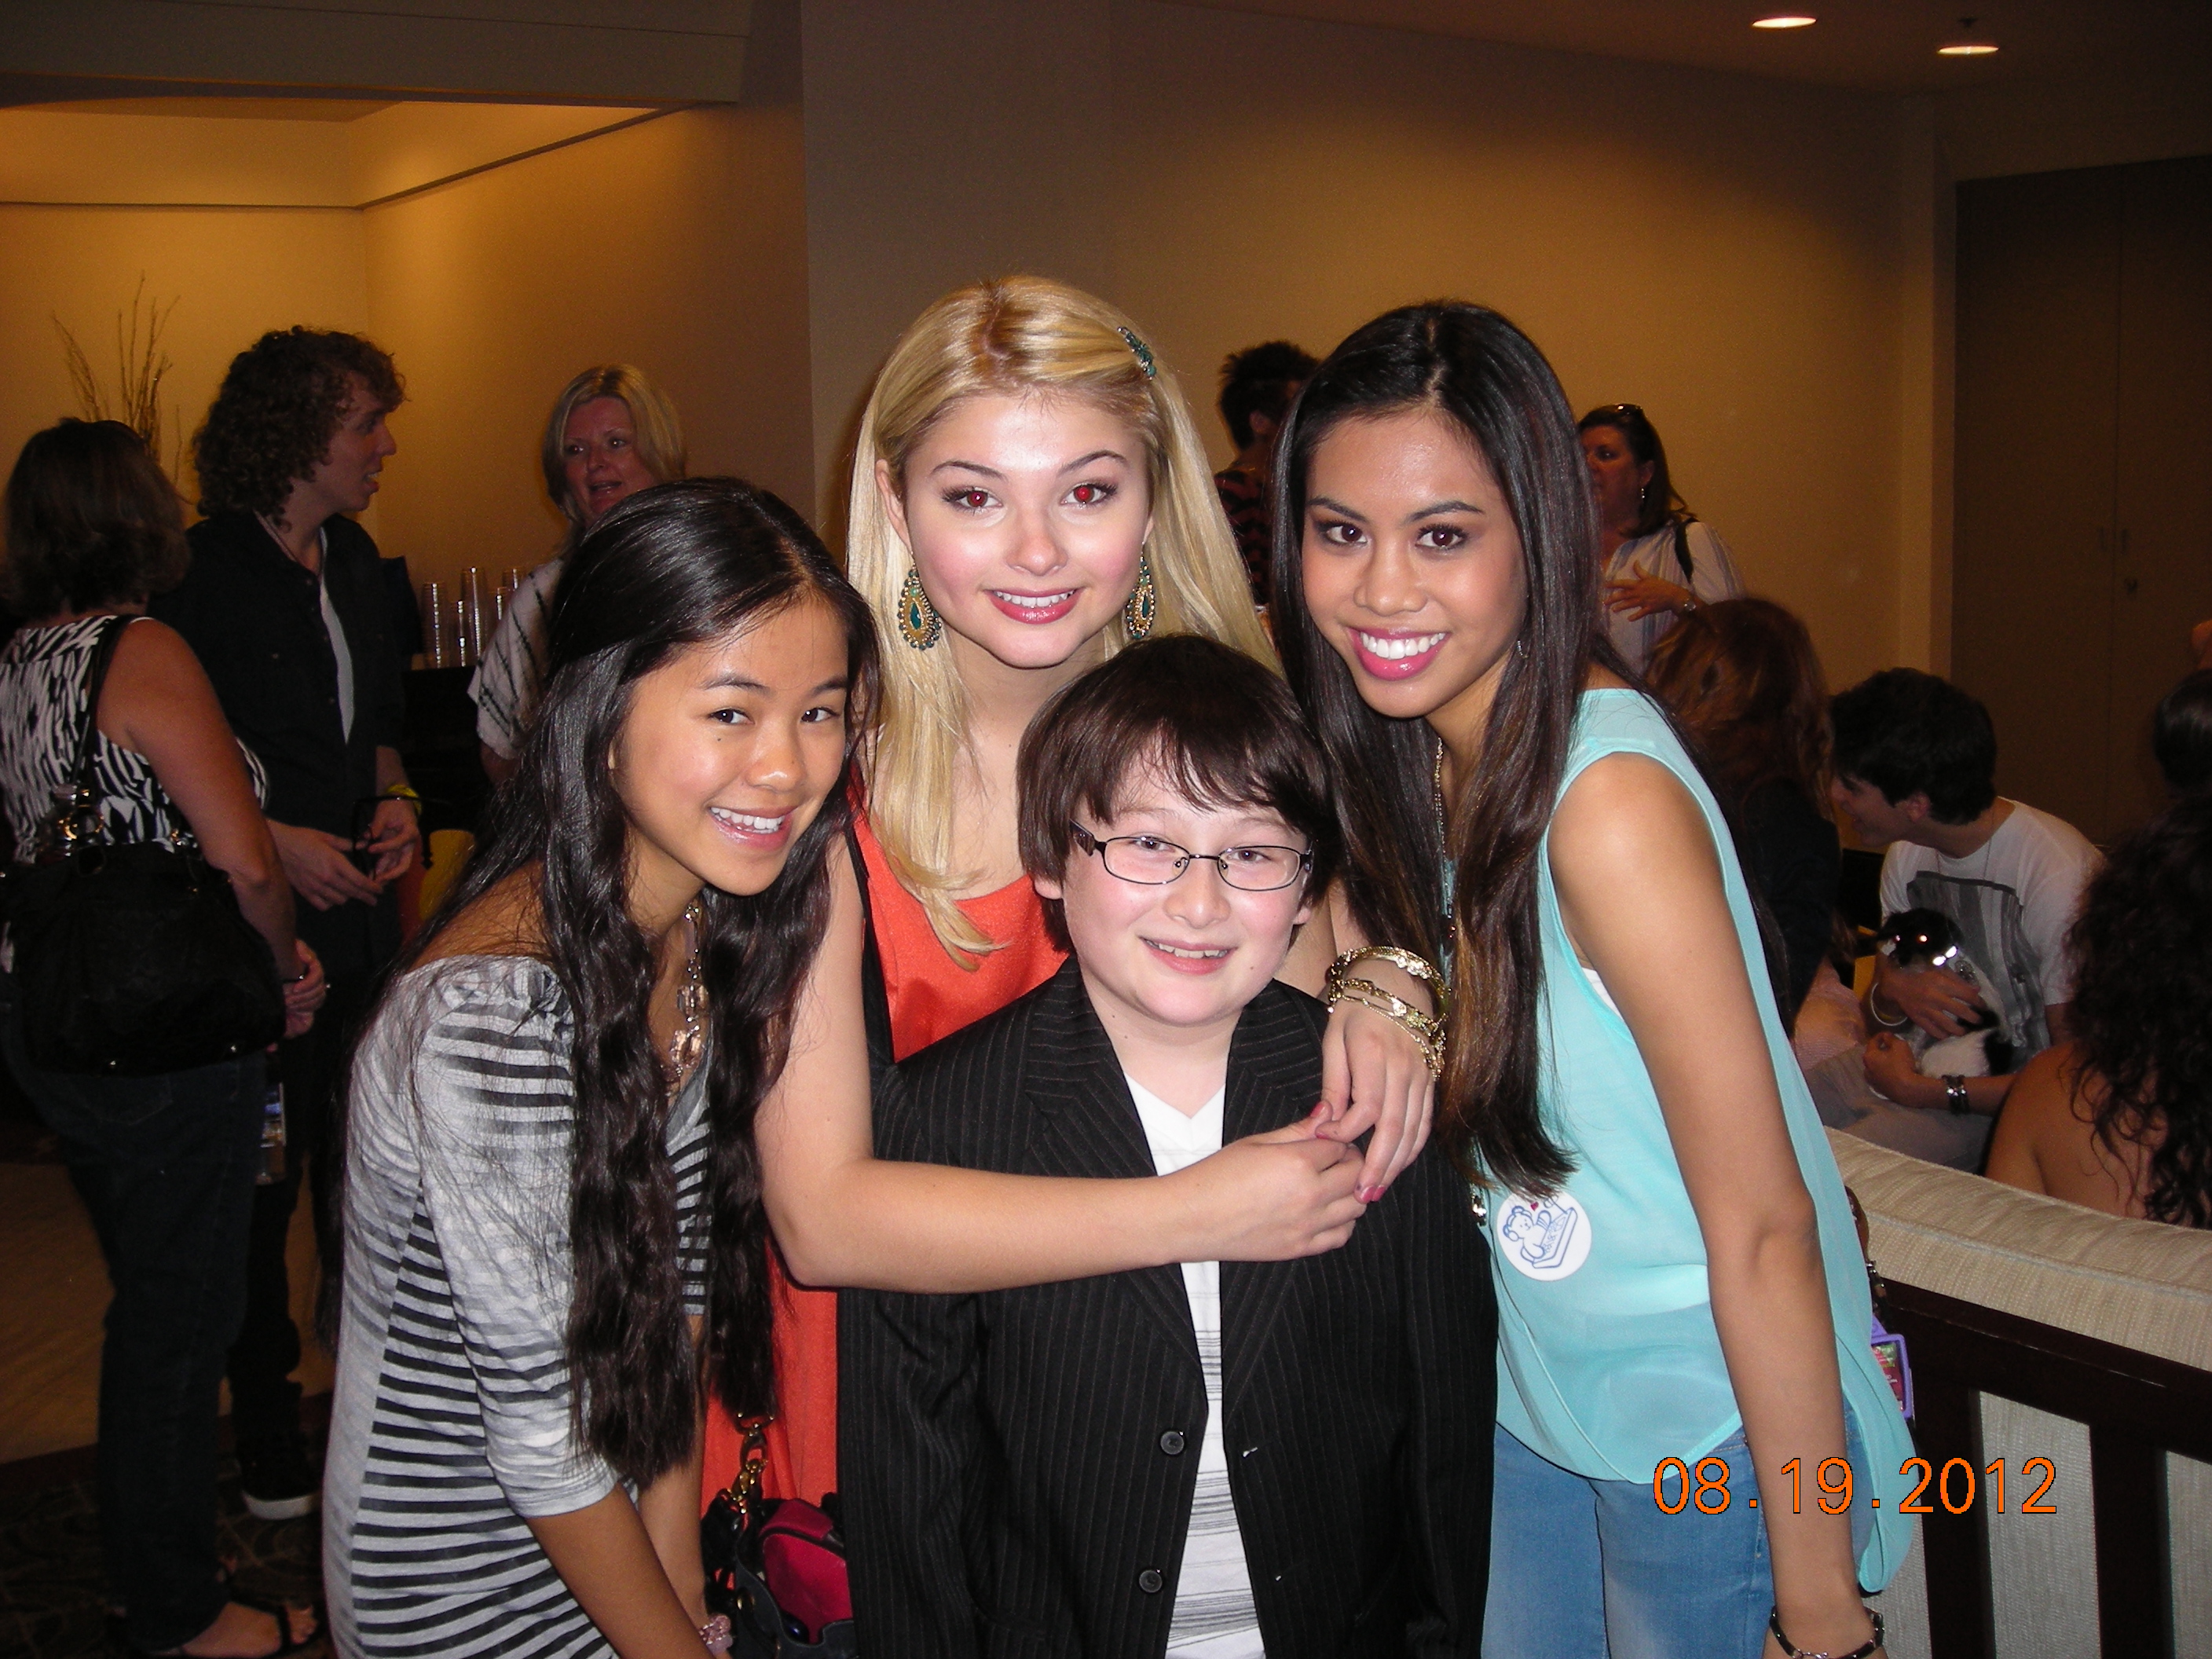 Me, with my friends and fellow alumni of Gary Spatz: The Playground - A Young Actors Conservatory.... Ashley Argota, Stefanie Scott and Tiffany Espensen at the CHOC 2012 Charity Event.